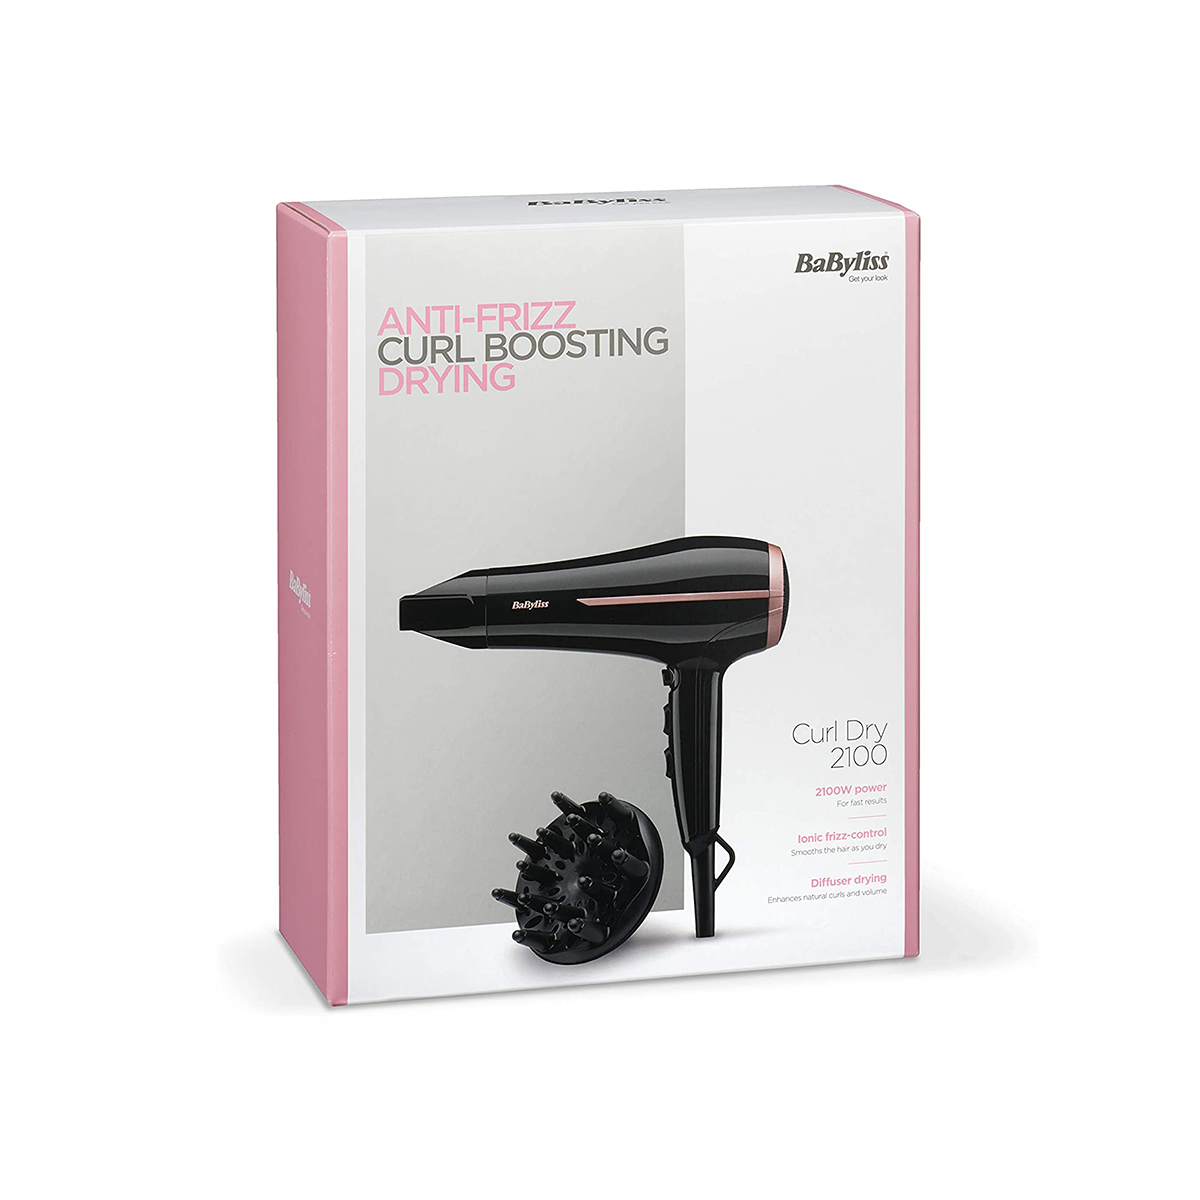 Babyliss Curl Dry 2100 Hair Dryer With Diffuser – Beauty Mind ll Beauty &  Cosmetics Store in Bangladesh